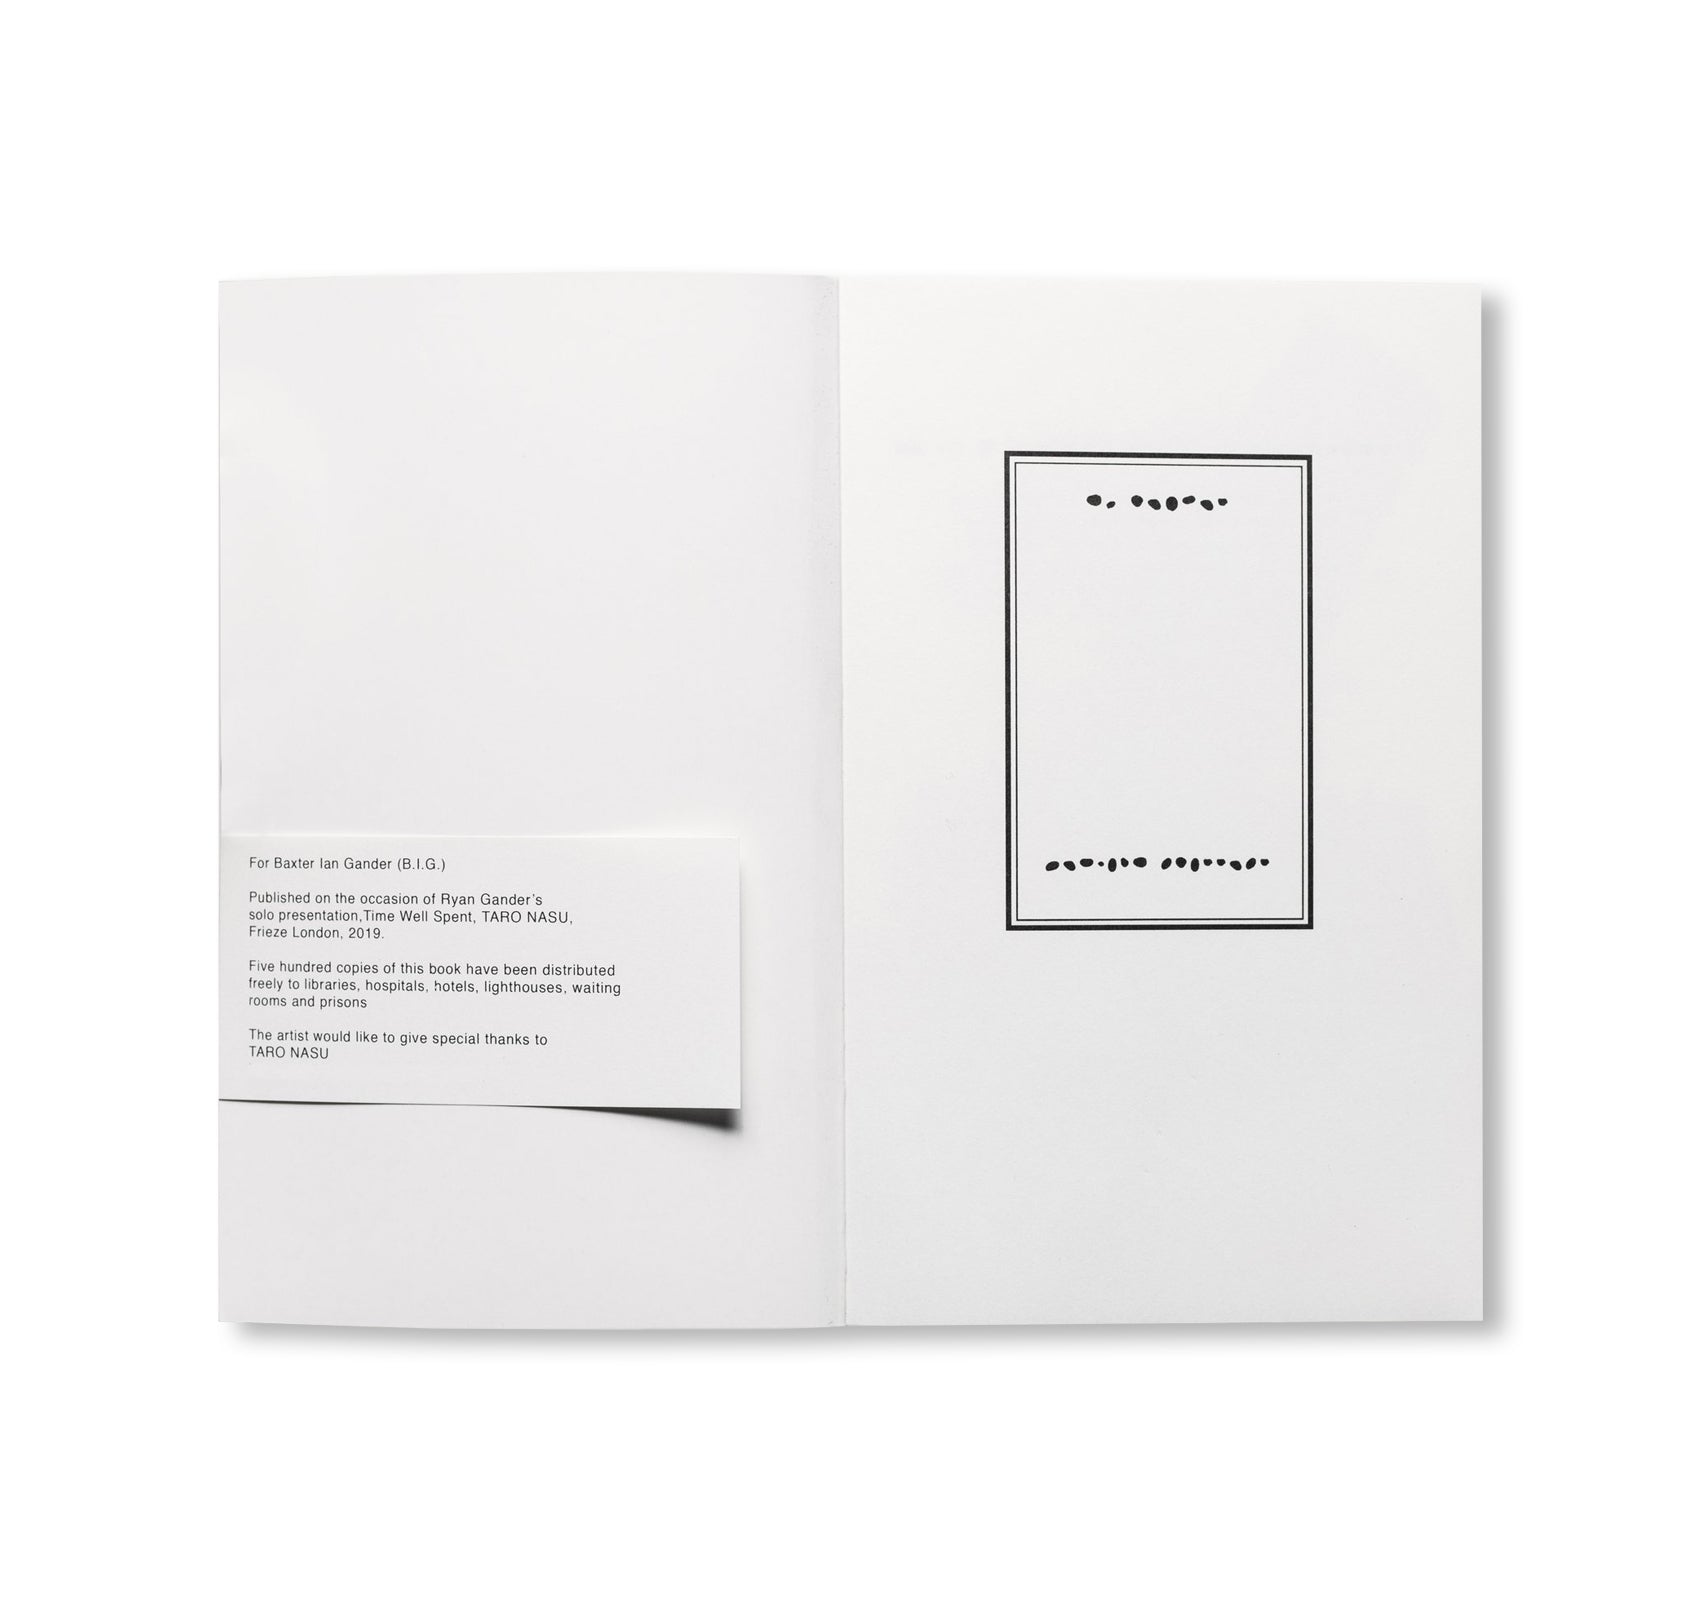 STABS AT ACADEMIA WITH PAINTERS TOOLS by Ryan Gander